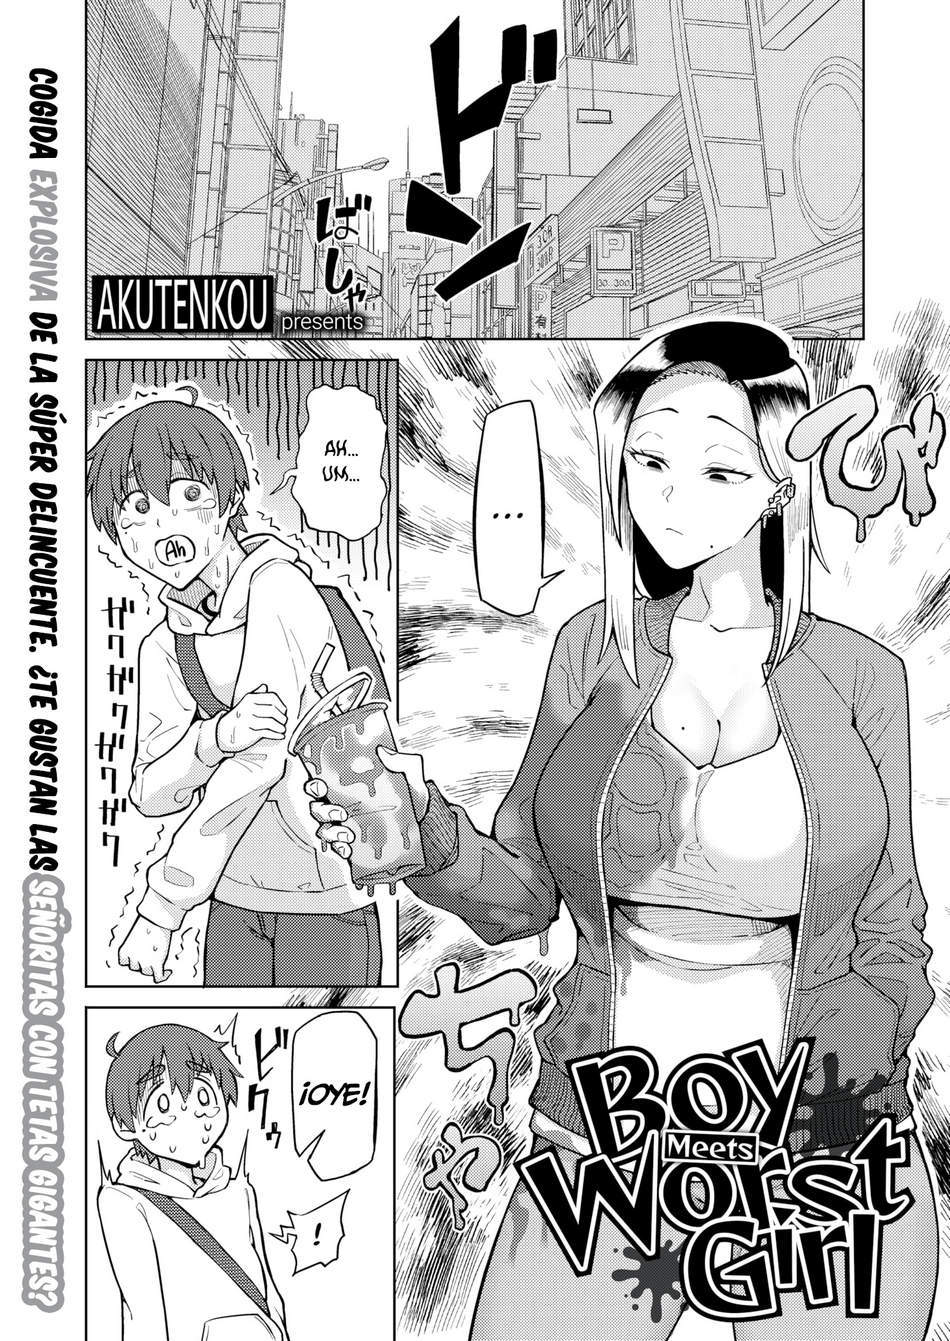 Boy Meets Worst Girl - Page #1